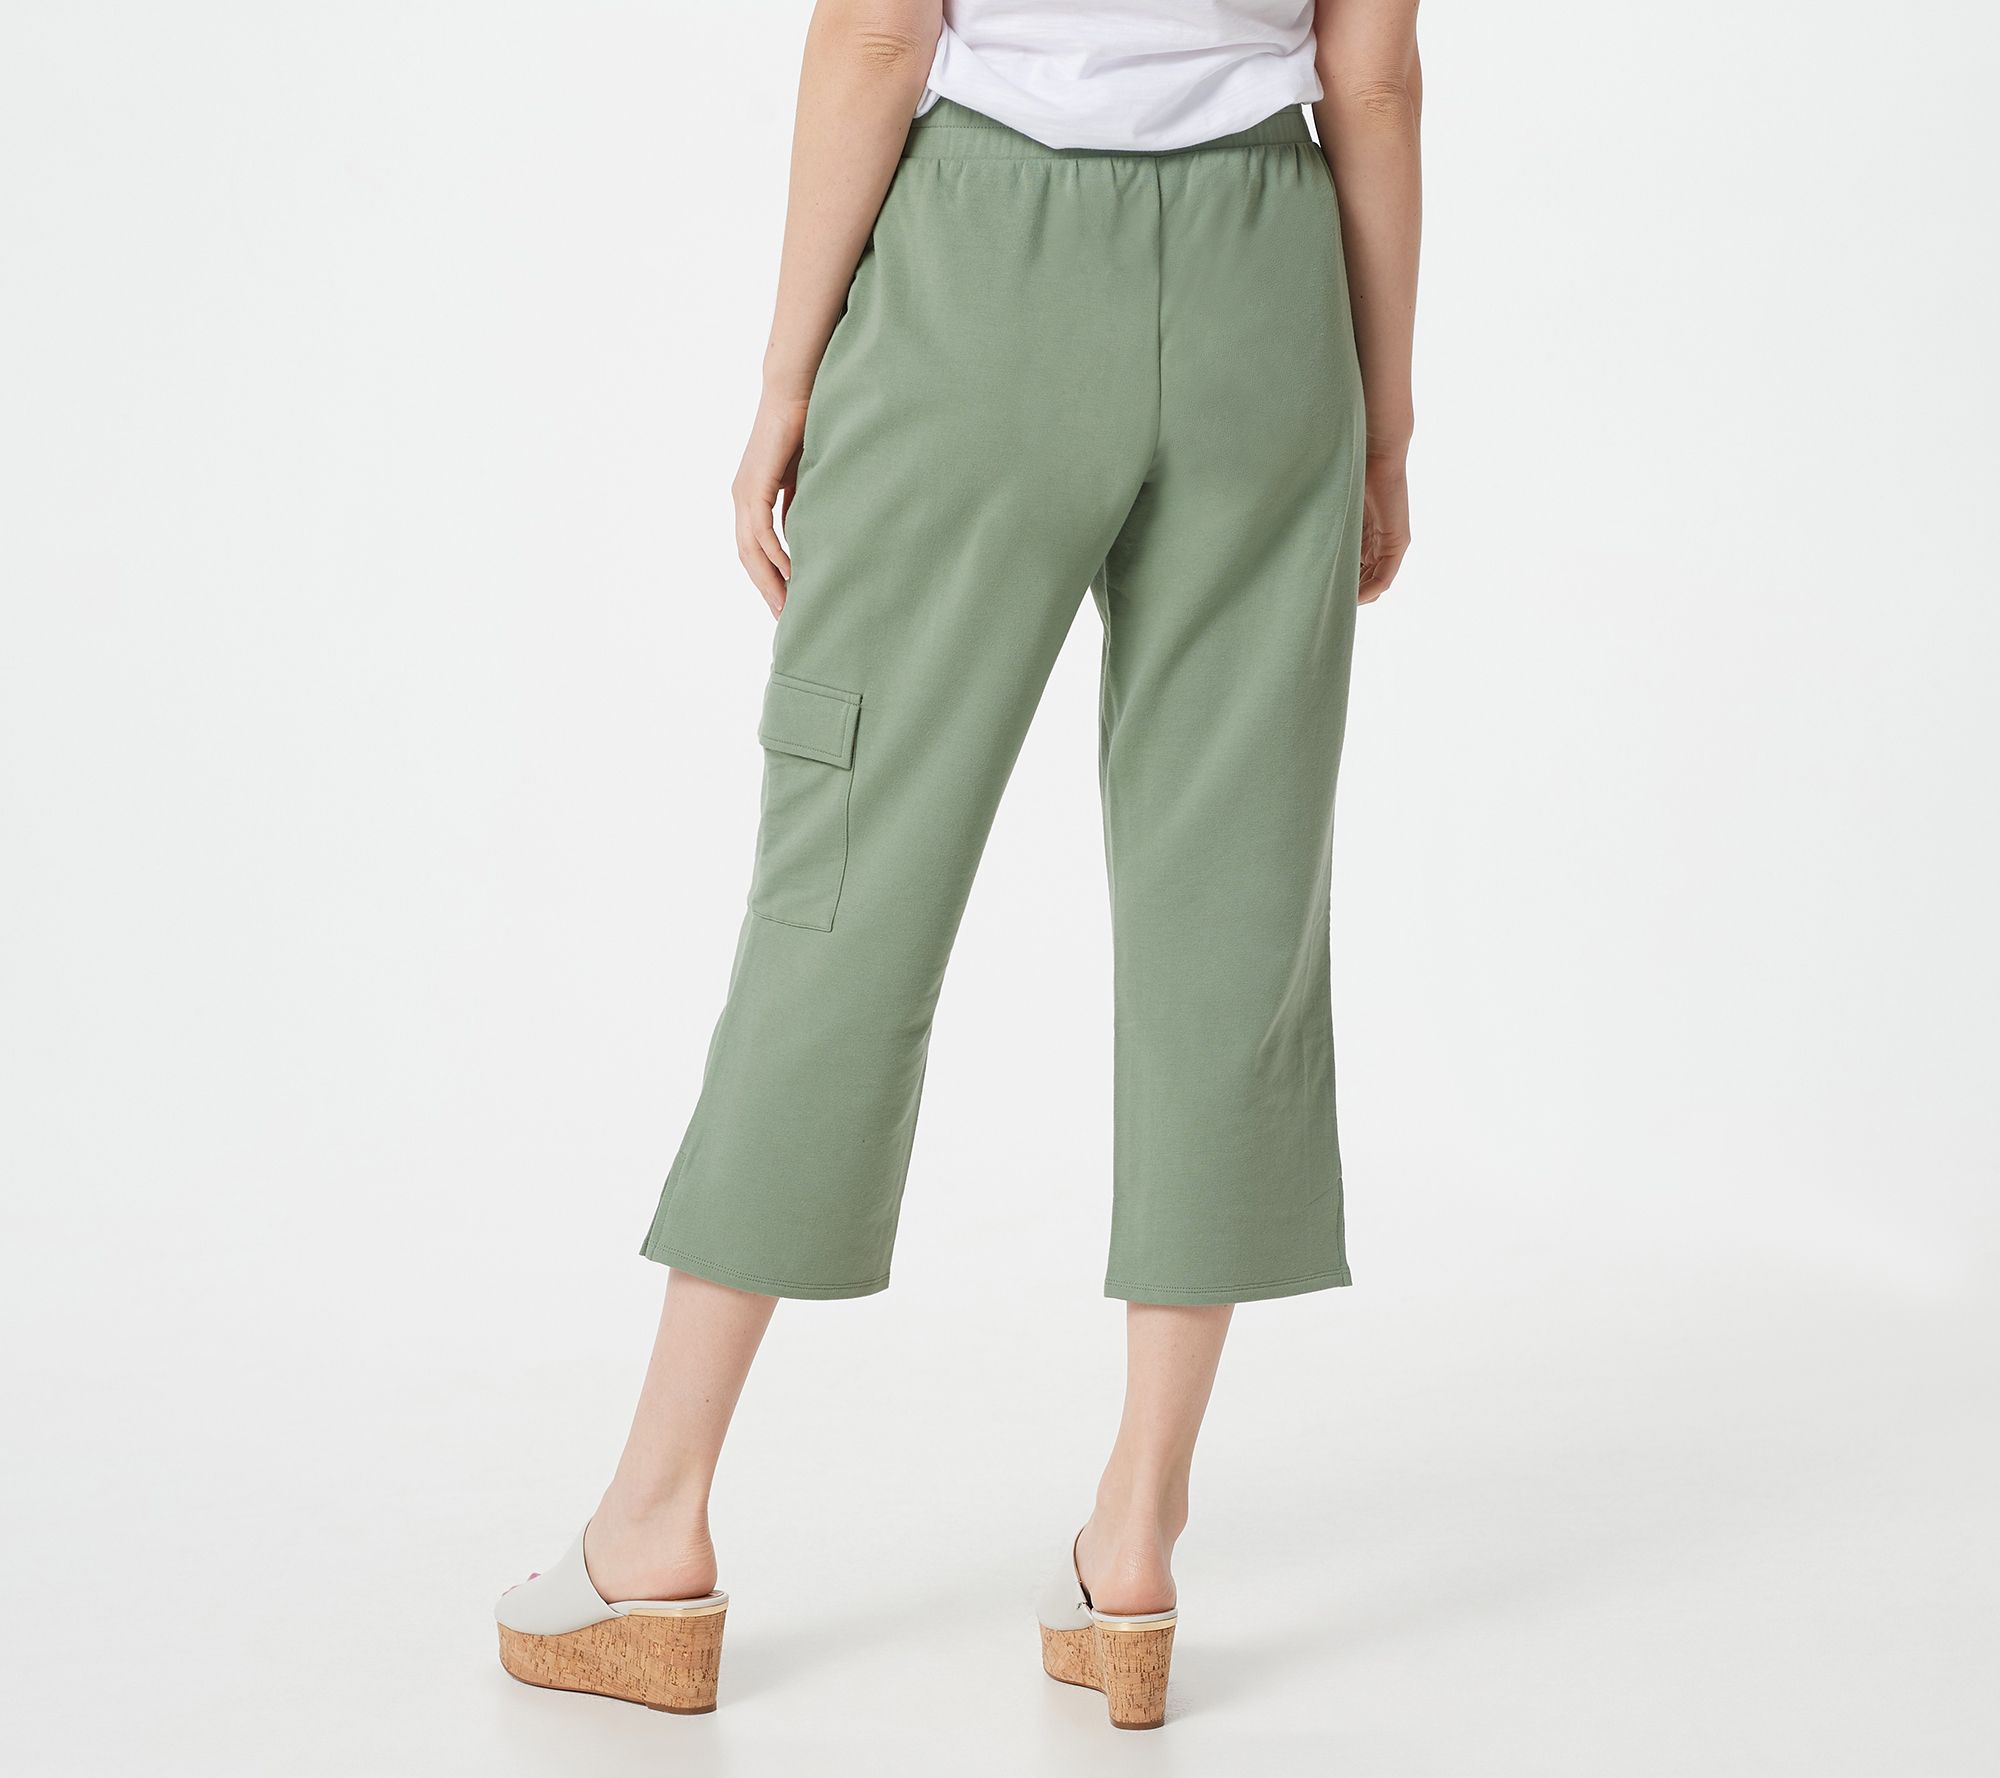 Belle Beach by Kim Gravel French Terry Cropped Cargo Pants - QVC.com